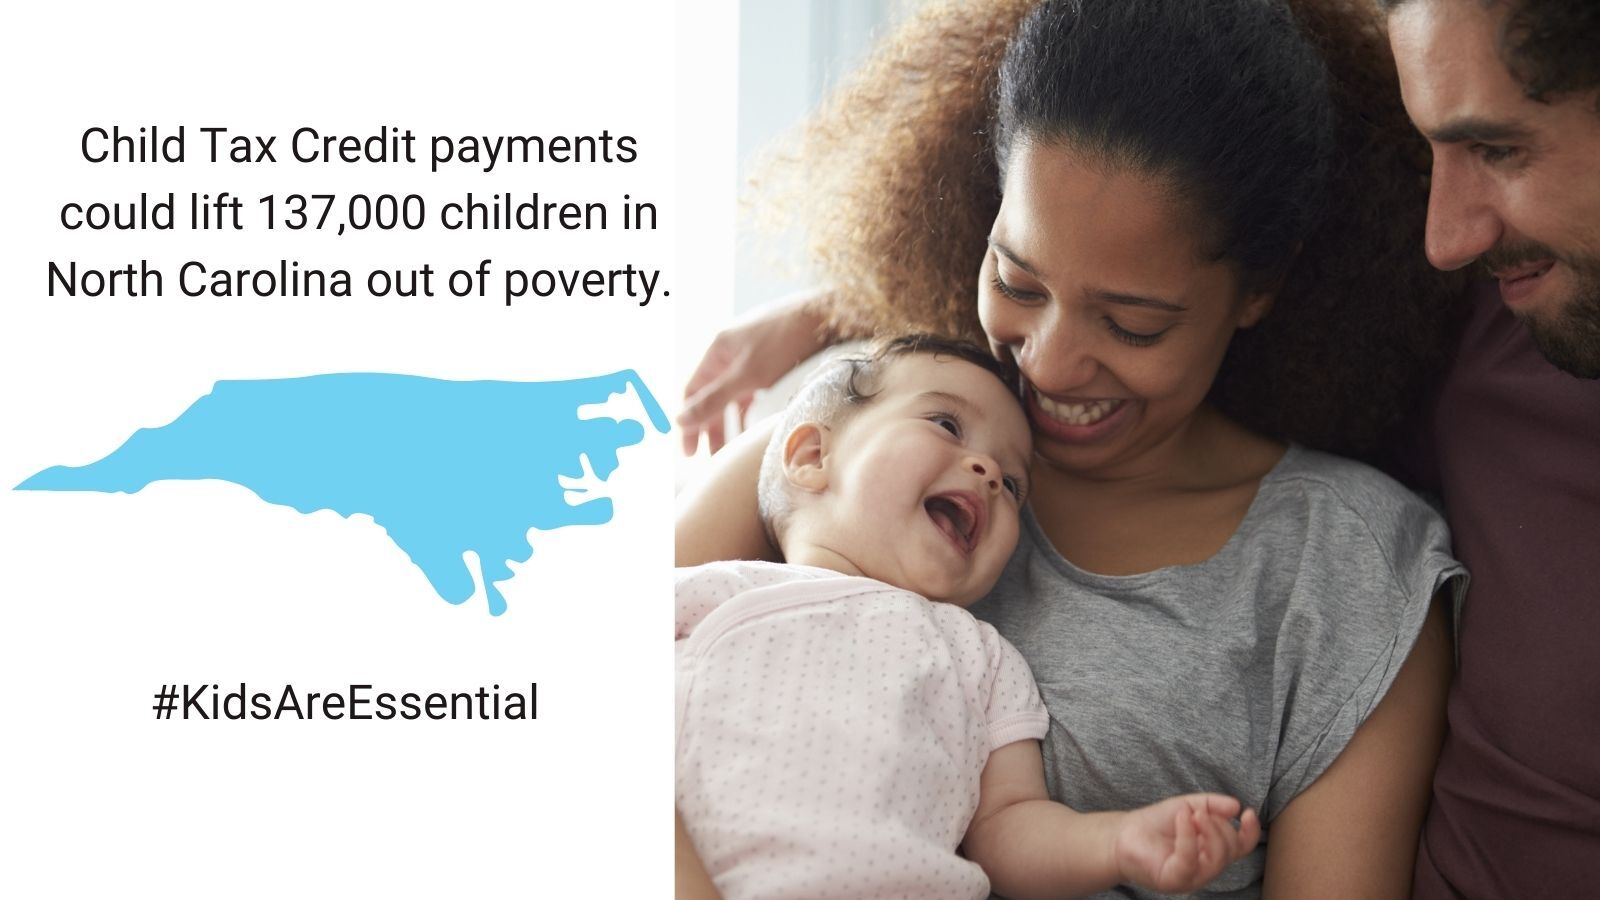 In North Carolina, payments could lift 137,000 children out of poverty.